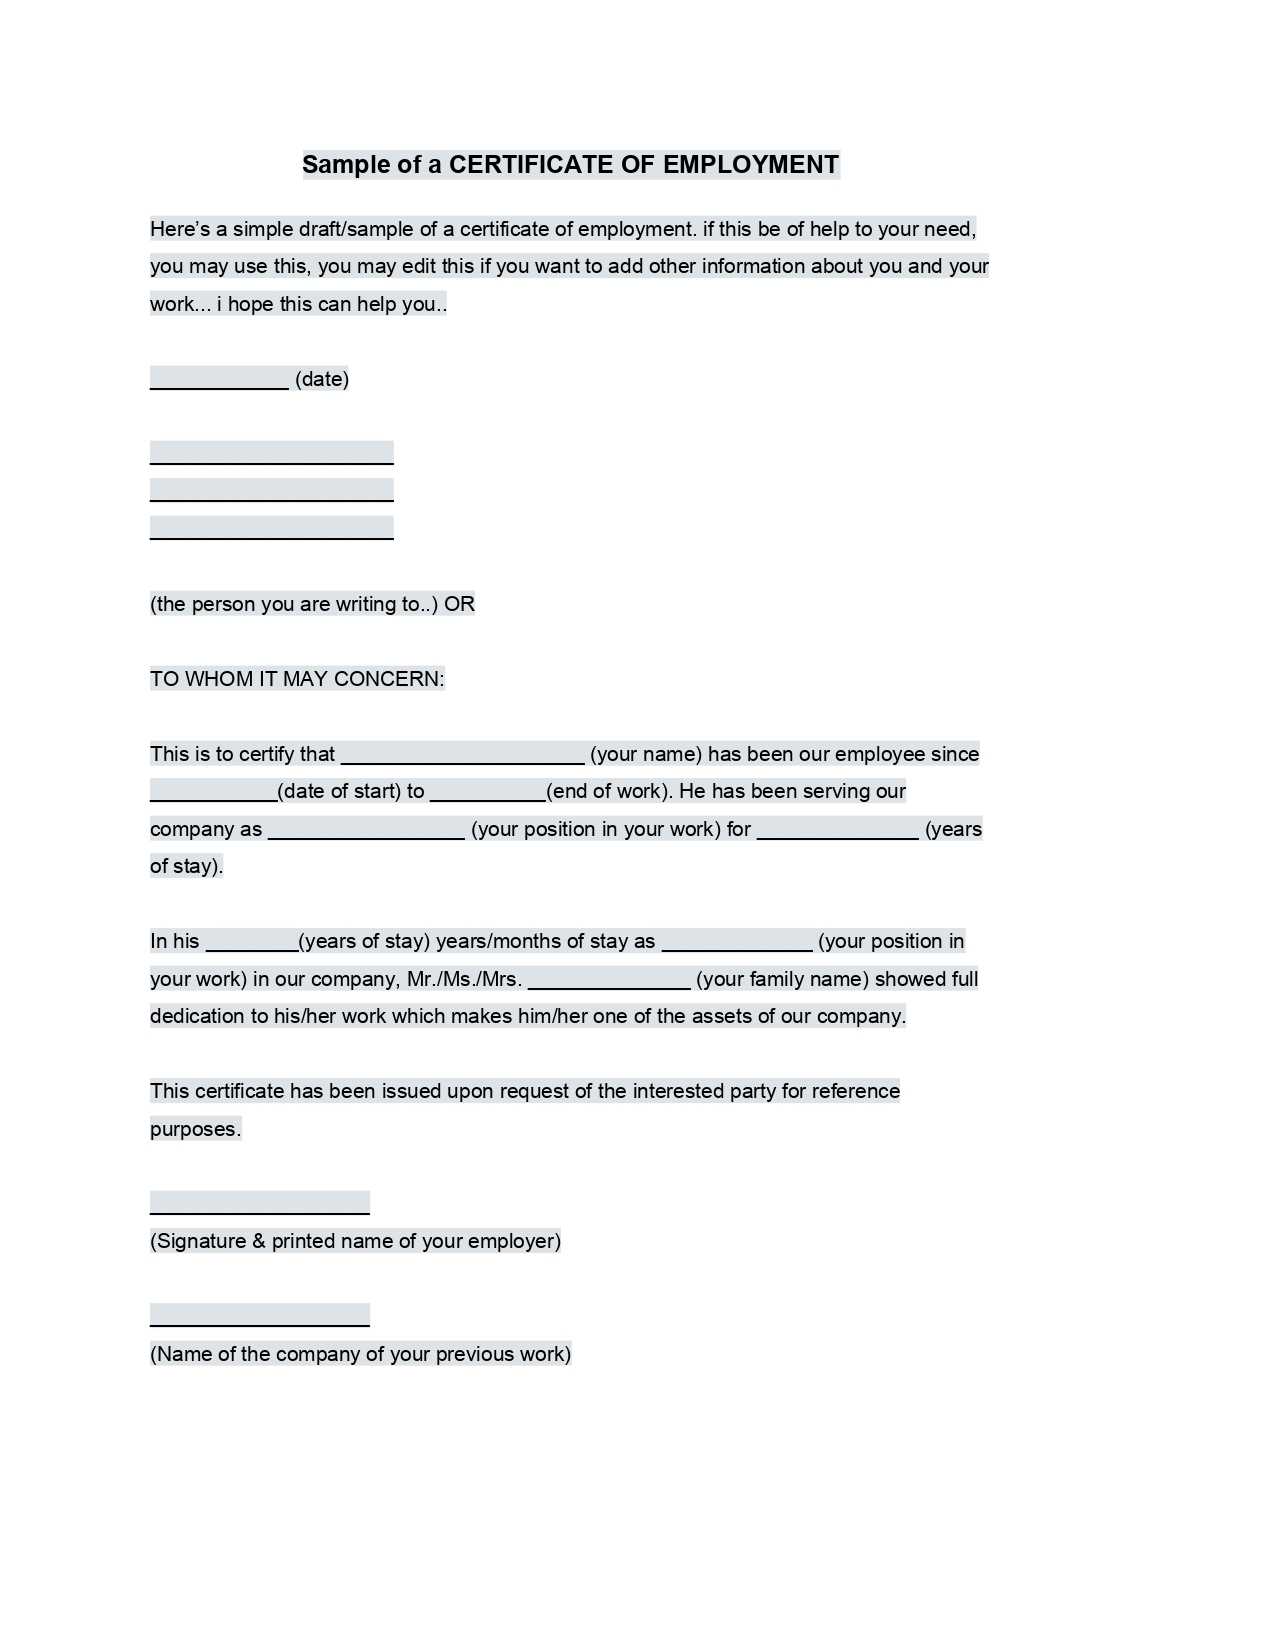 Sample Employment Certificate From Employer - Google Docs In Template Of Certificate Of Employment